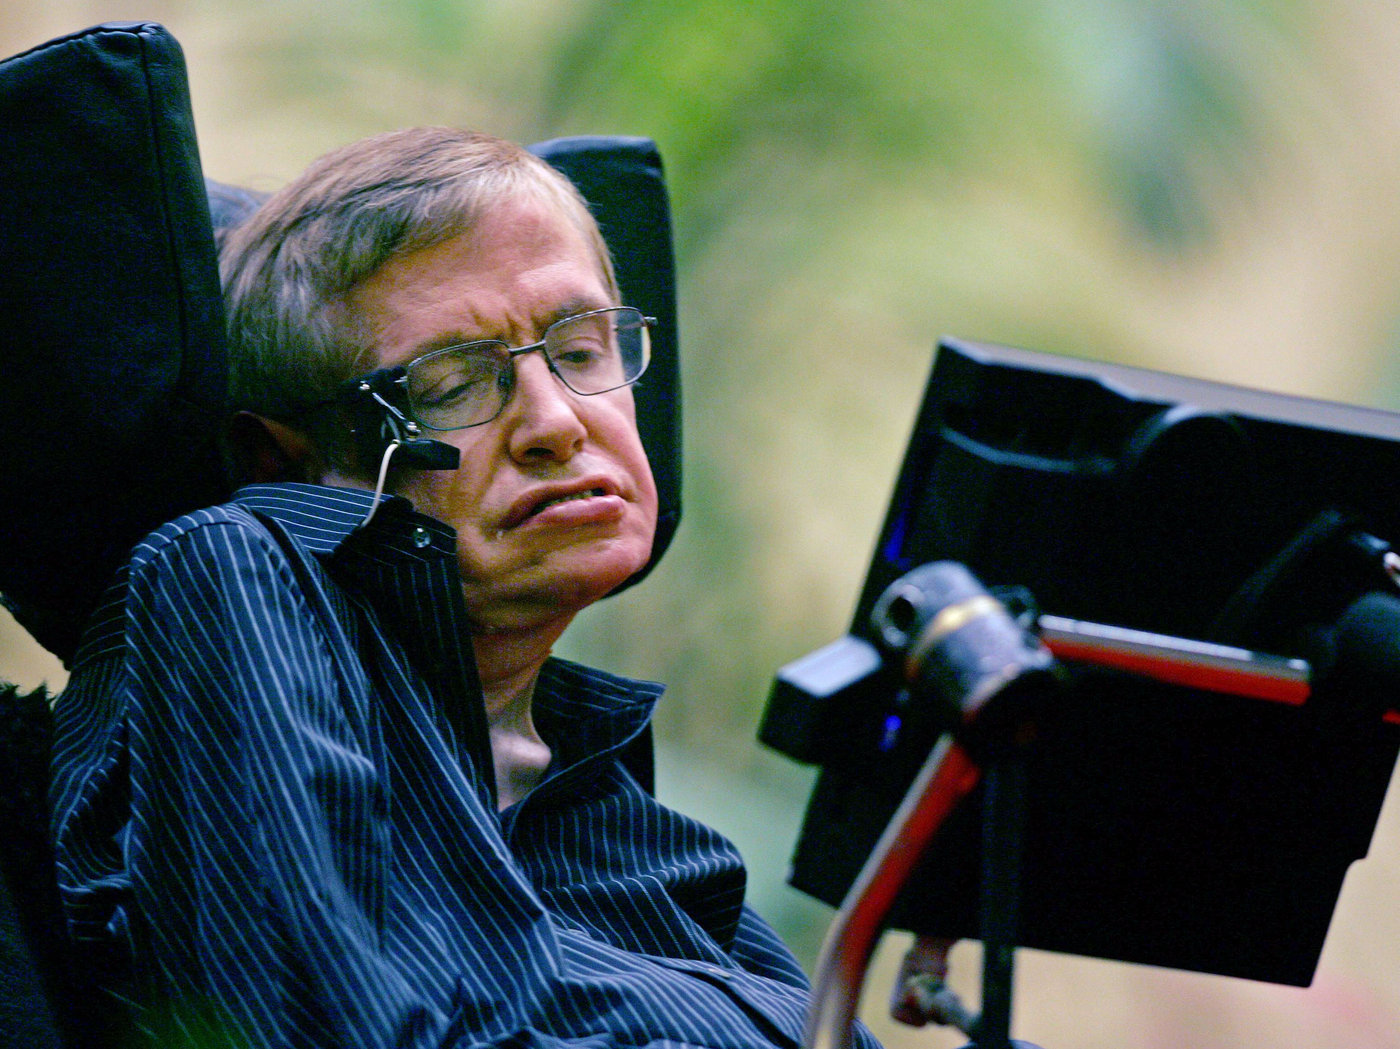 Stephen Hawking and his amazing assistive tech